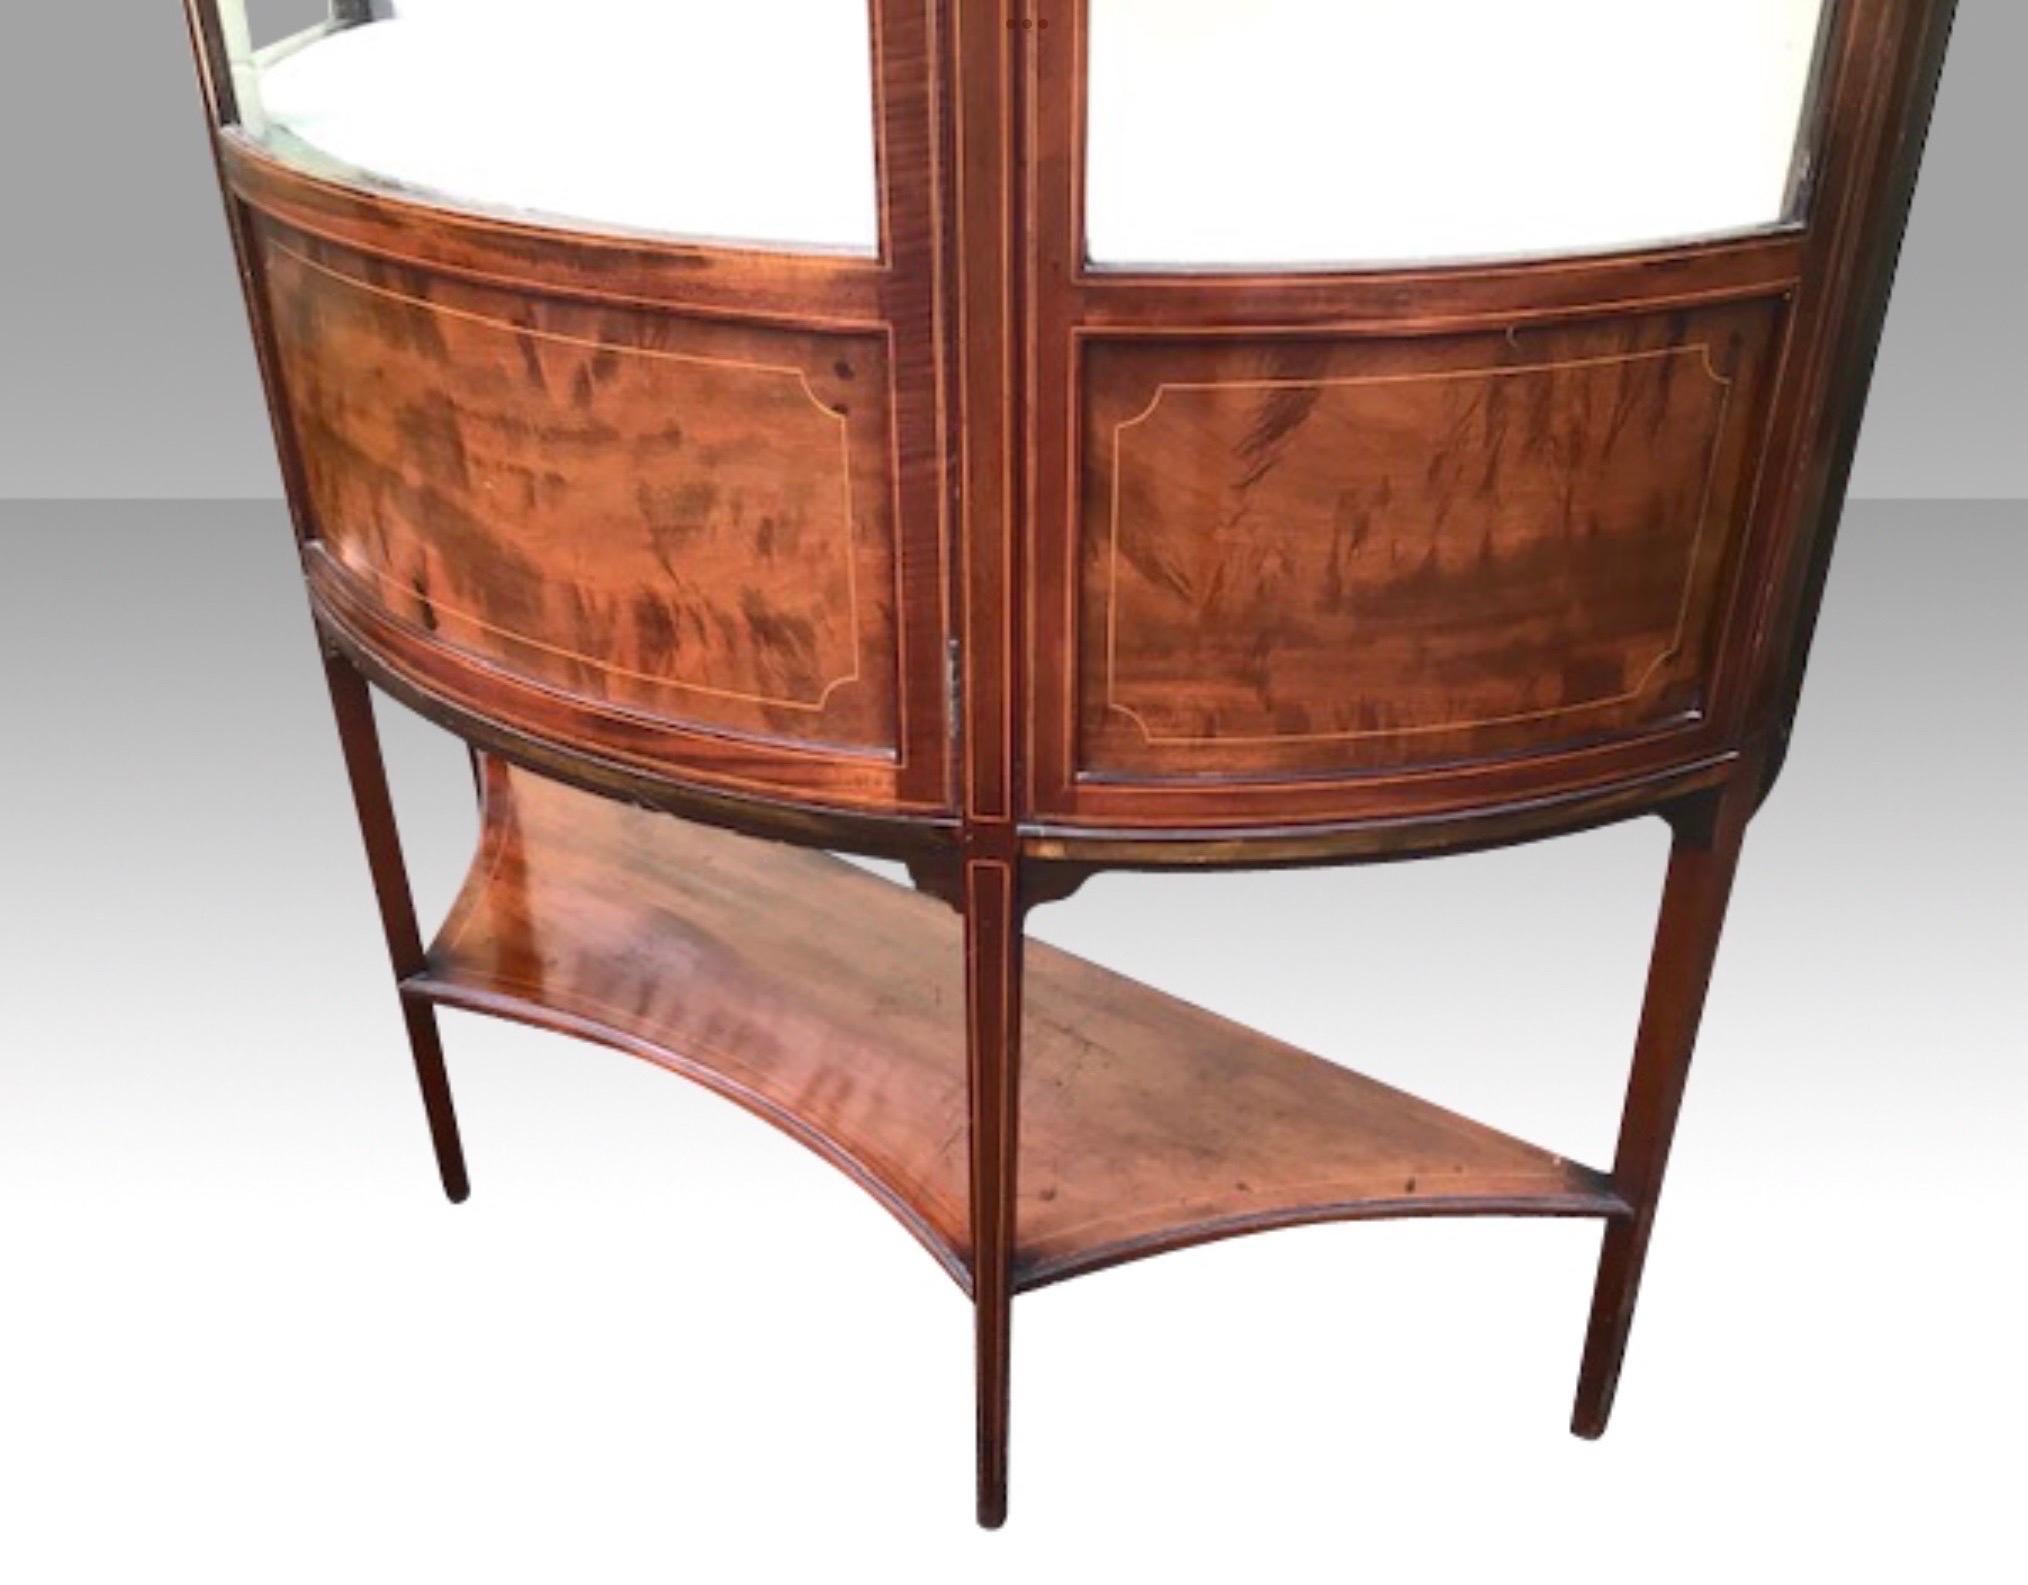 European Bow Fronted Inlaid Mahogany Antique Display Cabinet Vitrine by Maple and Co For Sale